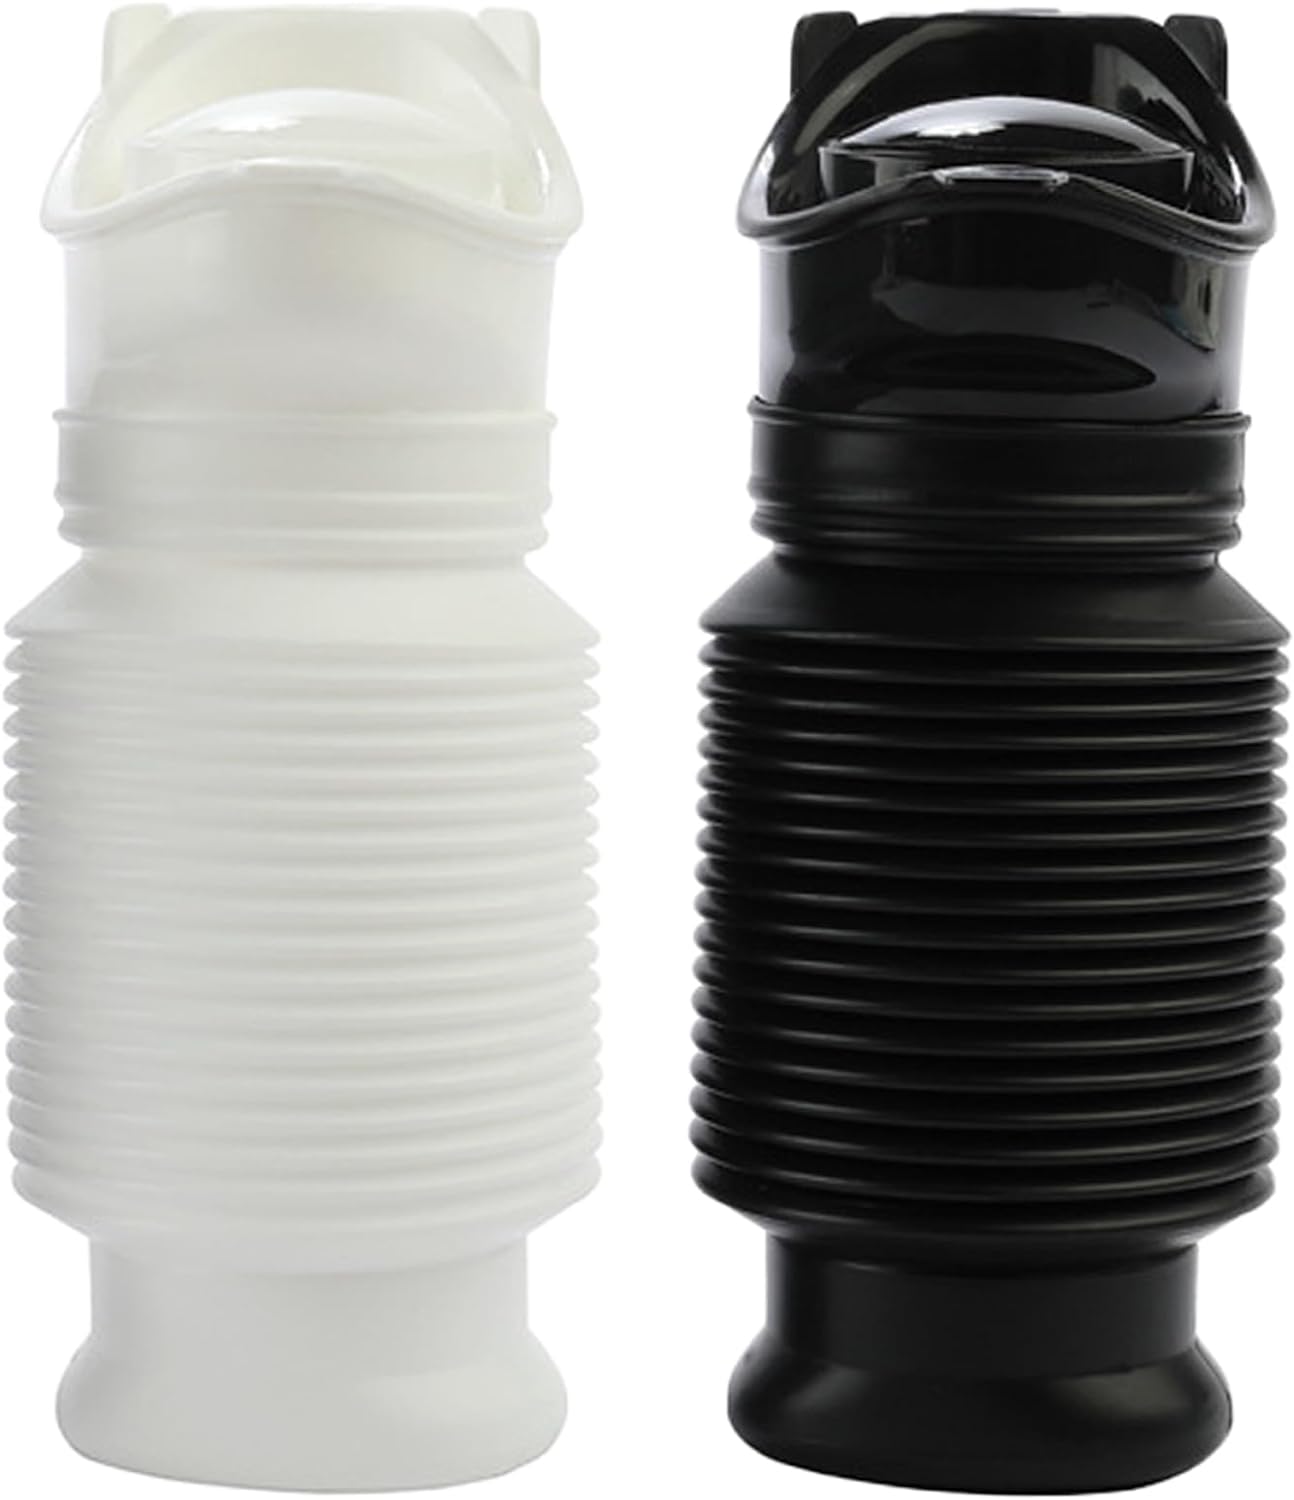 2 Pack Black and White 750ml Male Female Shrinkable Urinal Portable Mobile Toilet Potty Pee Urine Bottle Reusable Emergency Urinal for Camping Car Tra